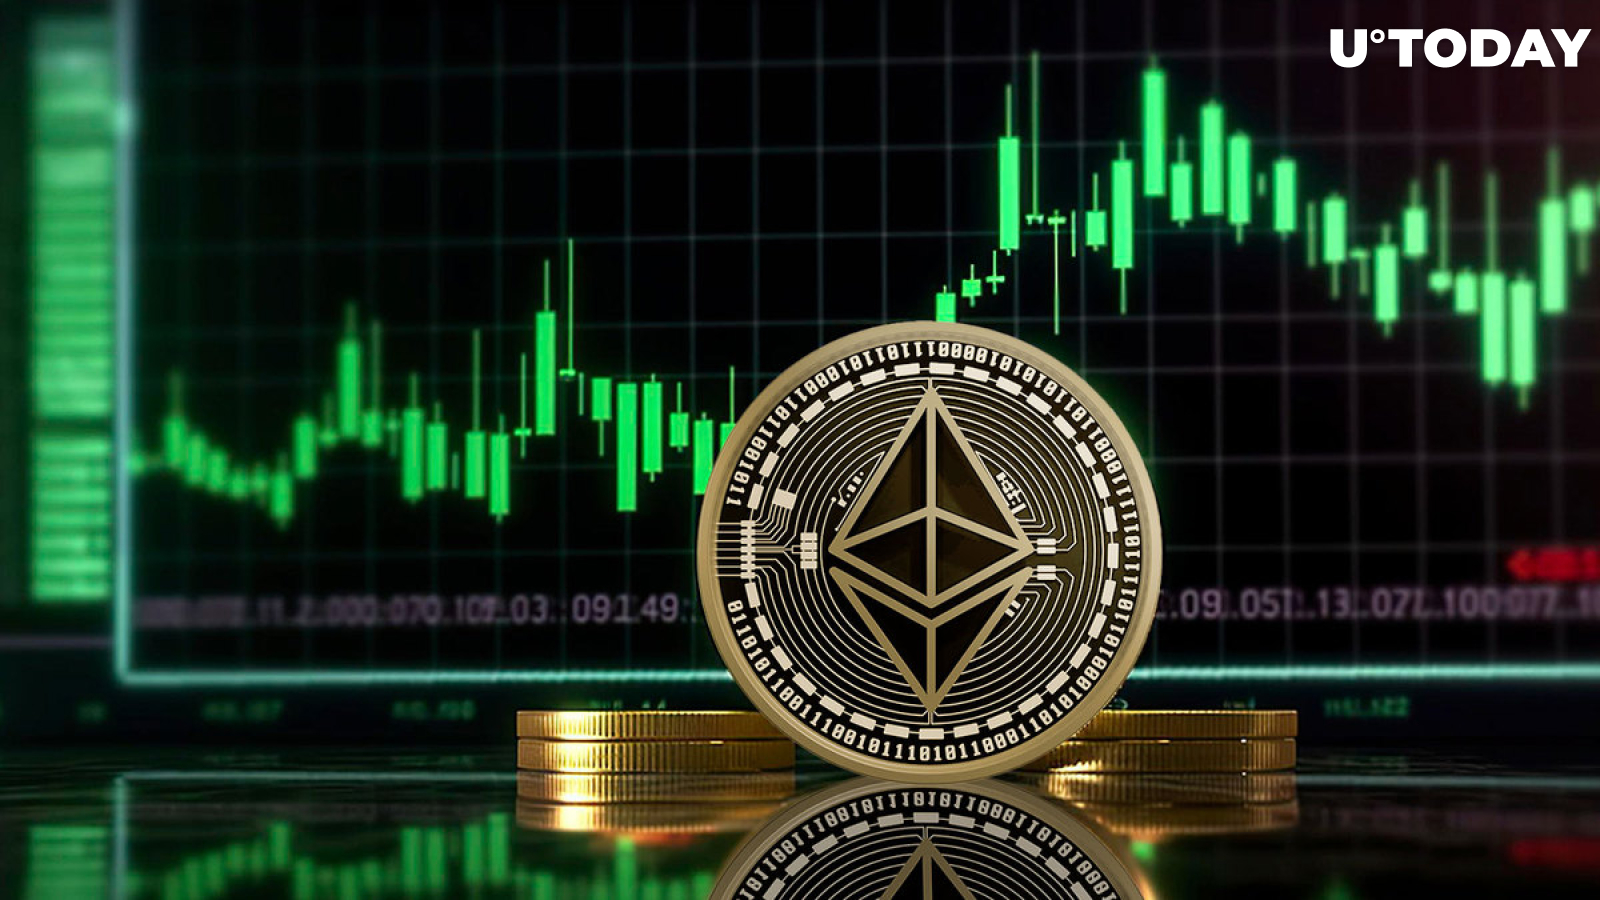 Ethereum (ETH) Outranks S&P 500 Giants in This Key Metric